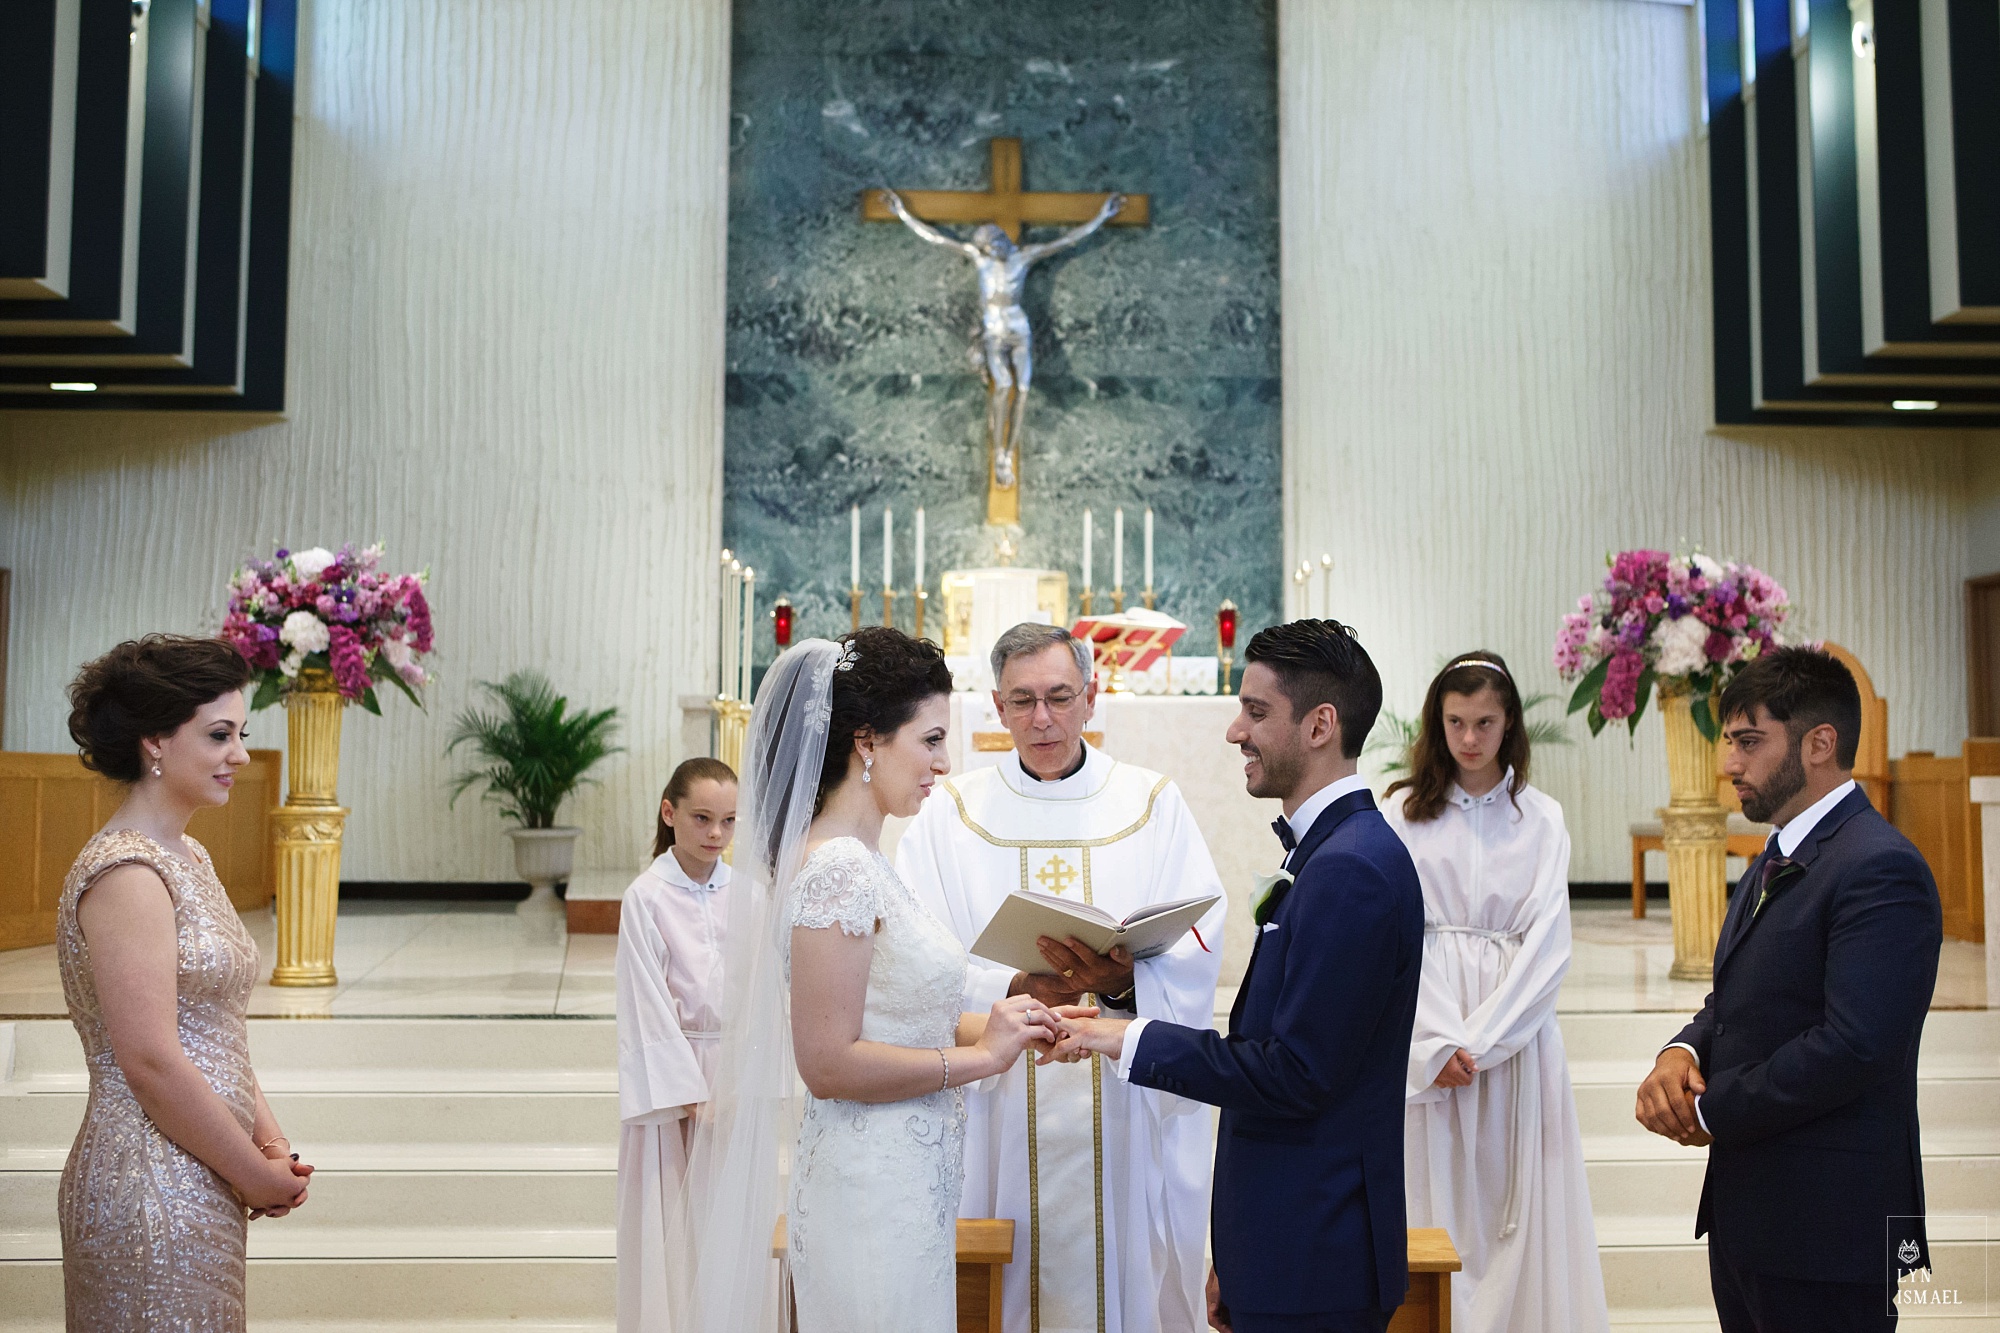 Bride and groom exchange rings at their wedding at St Gregory Catholic Church in Toronto, Ontario.